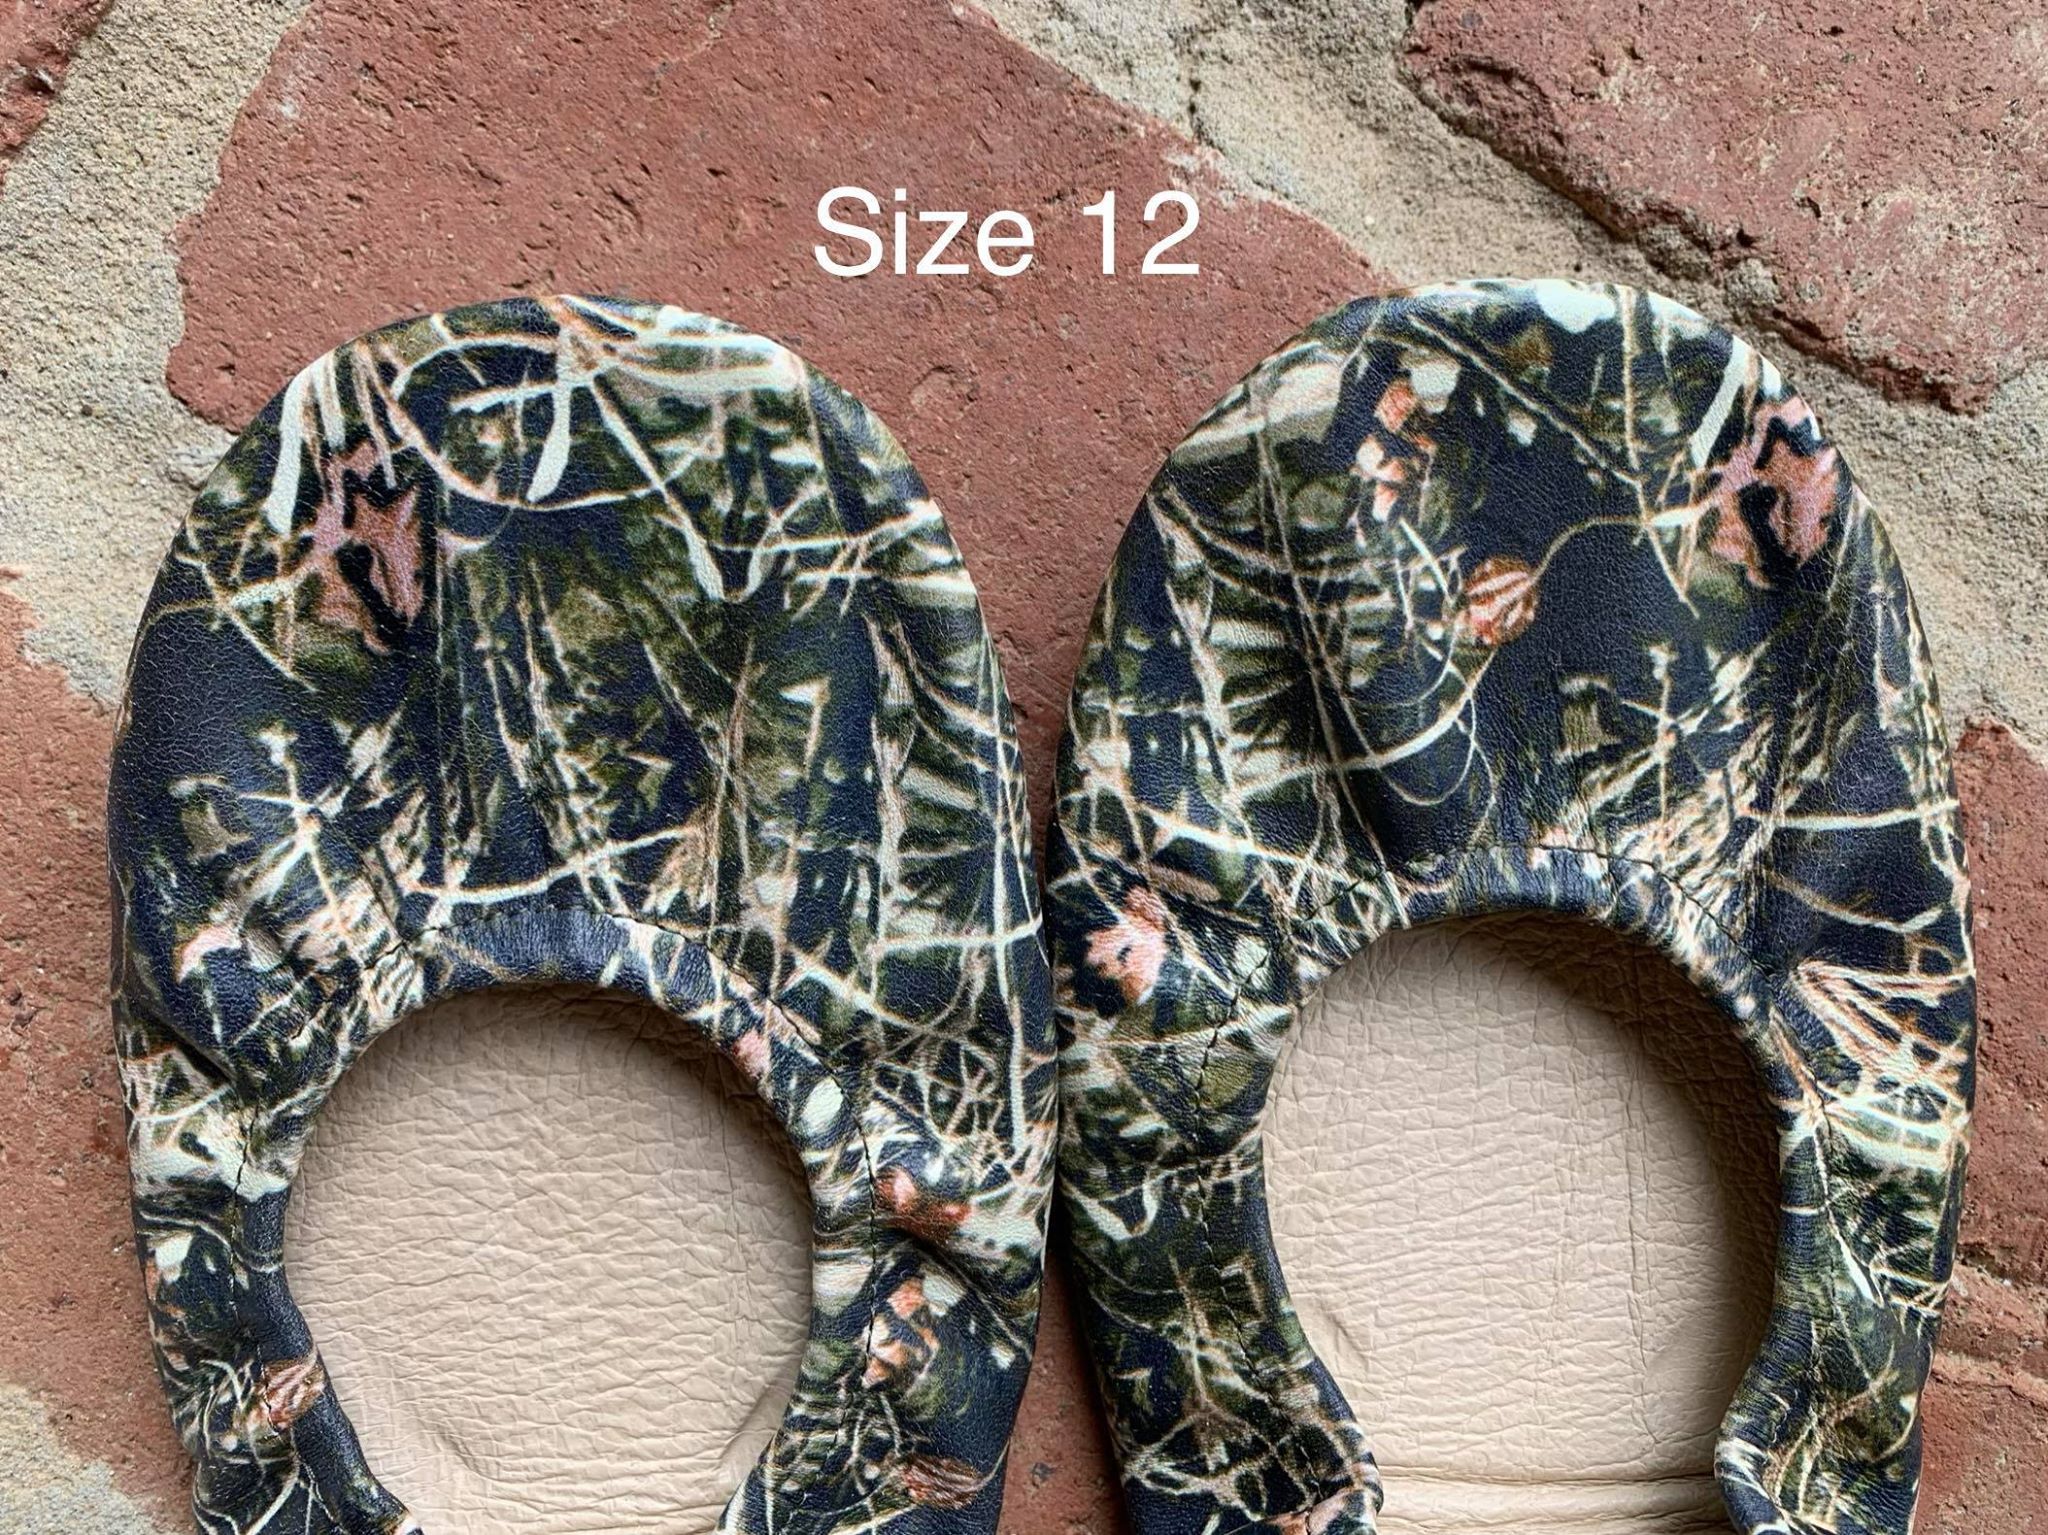 WOODLAND CAMO - Size 12 - In Stock, ship now